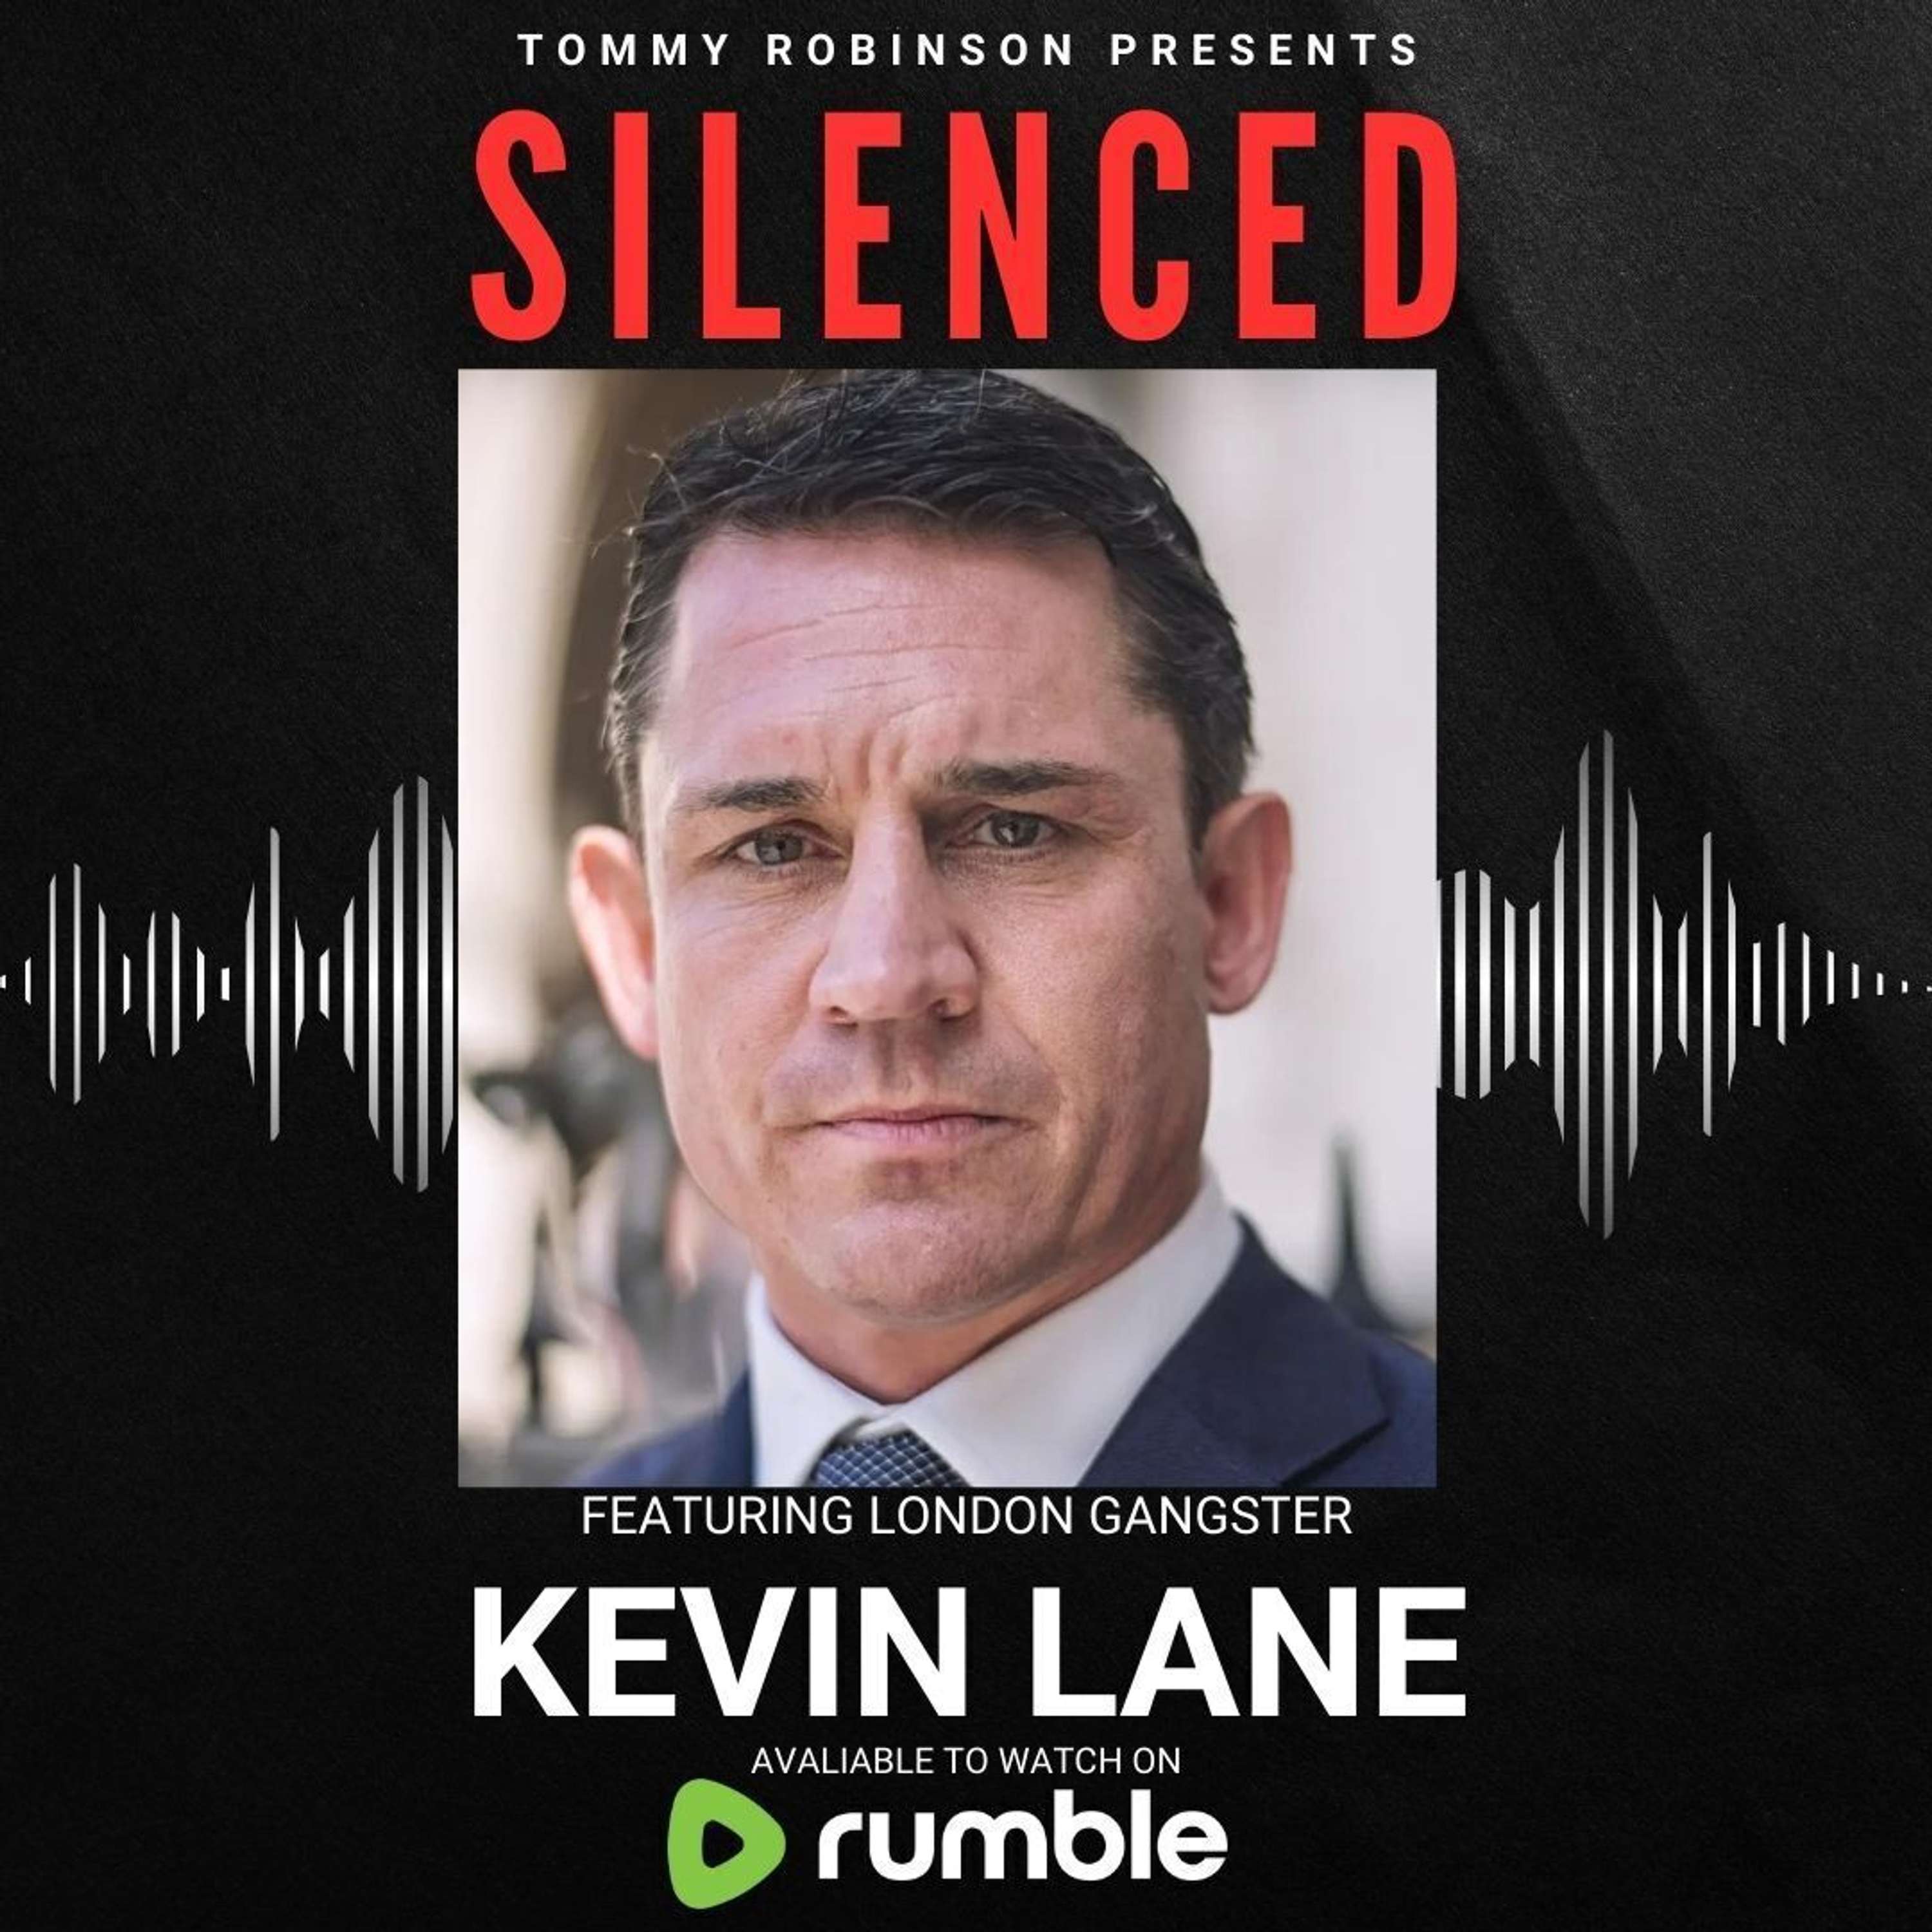 Episode 25 - SILENCED with Tommy Robinson - Kevin Lane